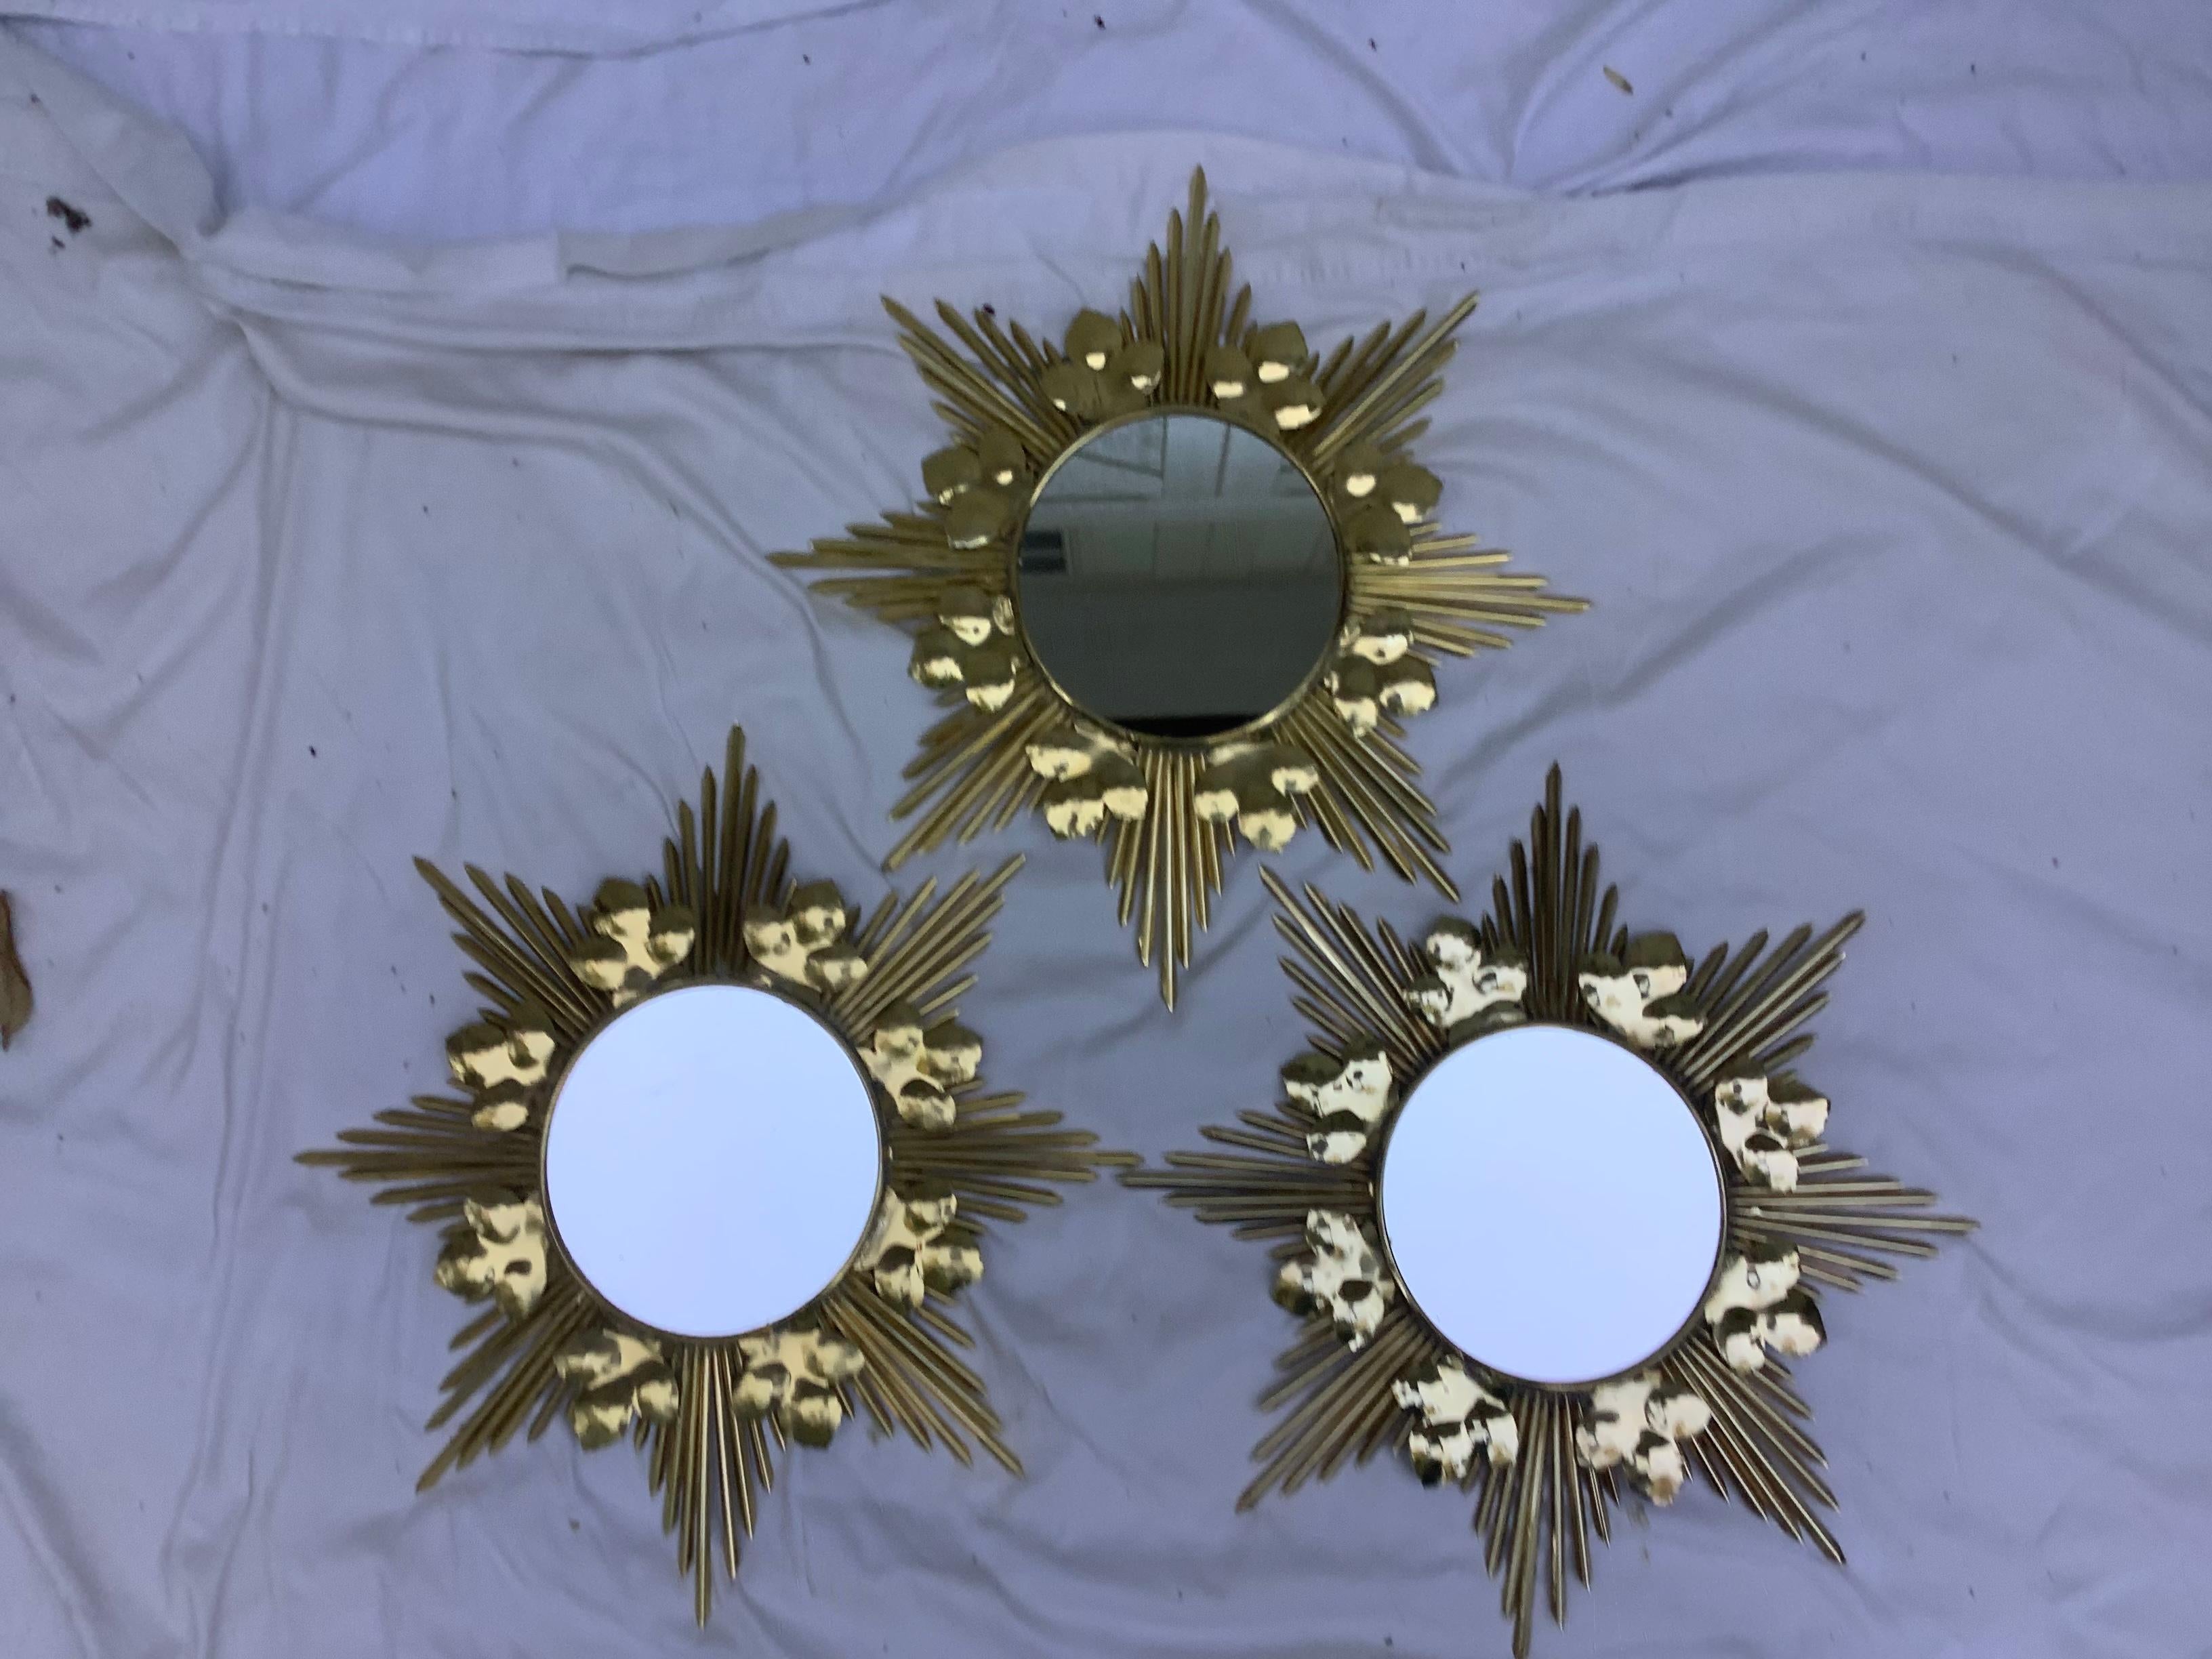 I bought some “new old stock”, of these brass sunbursts, that were originally German clocks. I replaced the clocks with mirrors. I thought they turned out quite well! The mirror, itself, measures 7.5” D. The mirrors measure 19” D at the widest point.